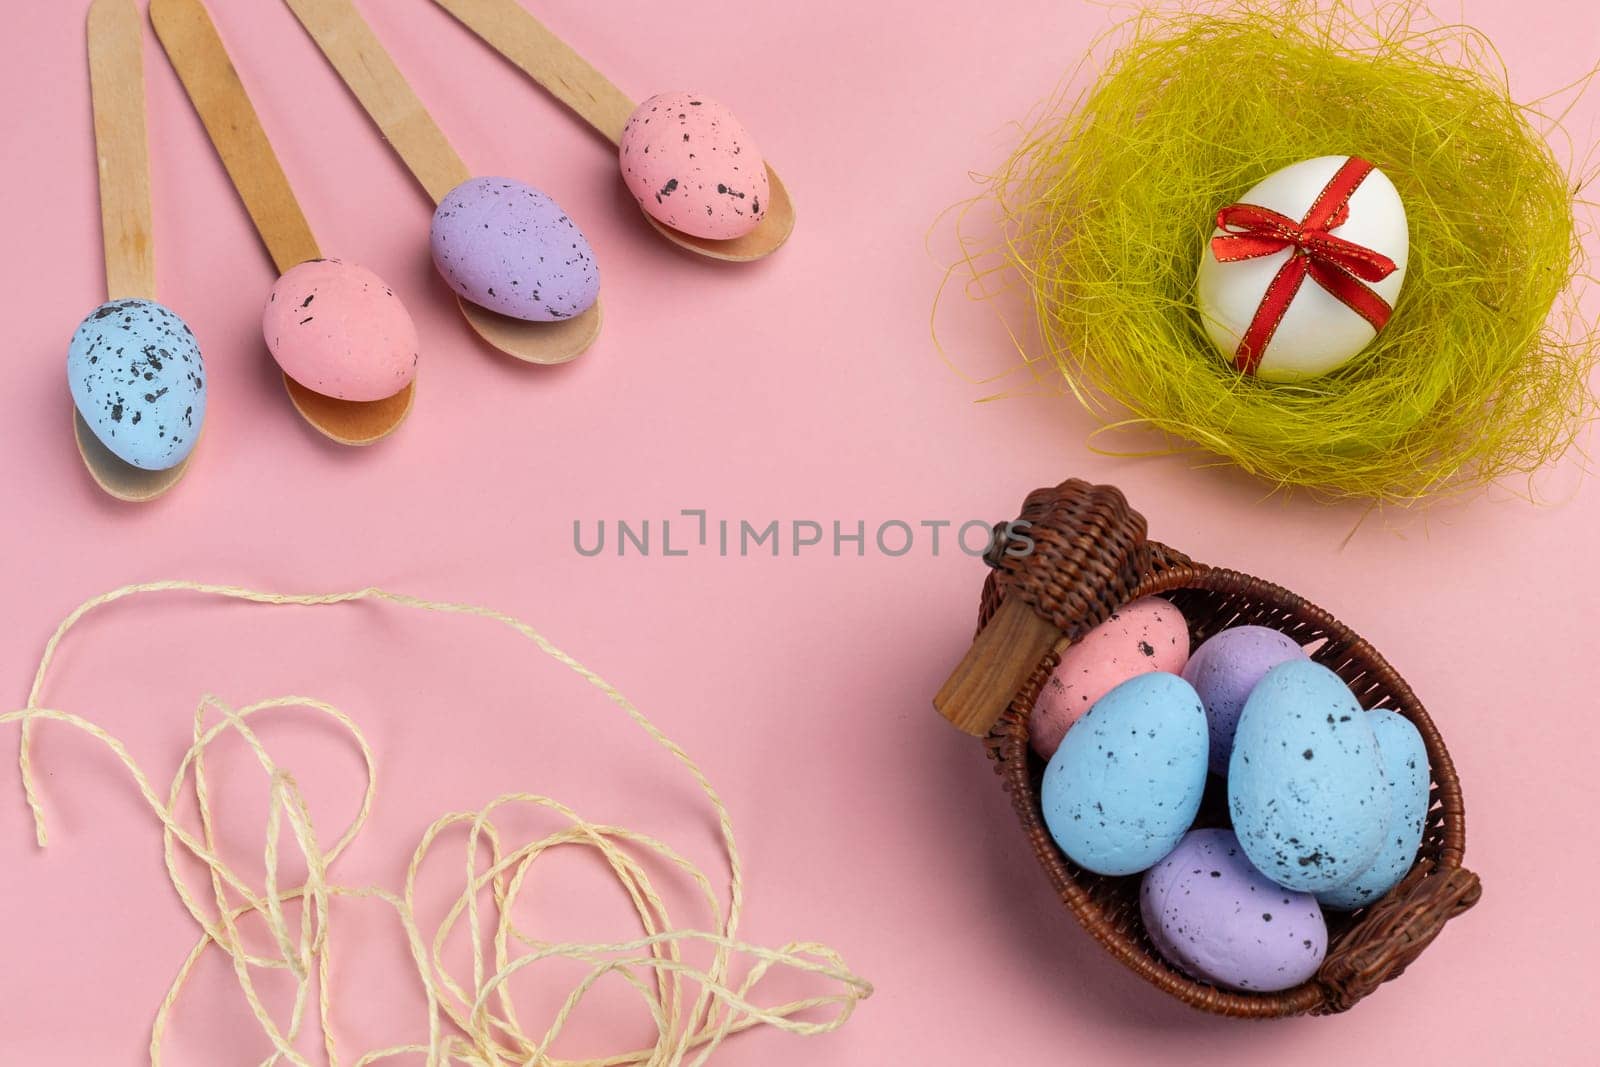 Colored Easter eggs on wooden spoons and in a wicker basket with a nest. by mvg6894